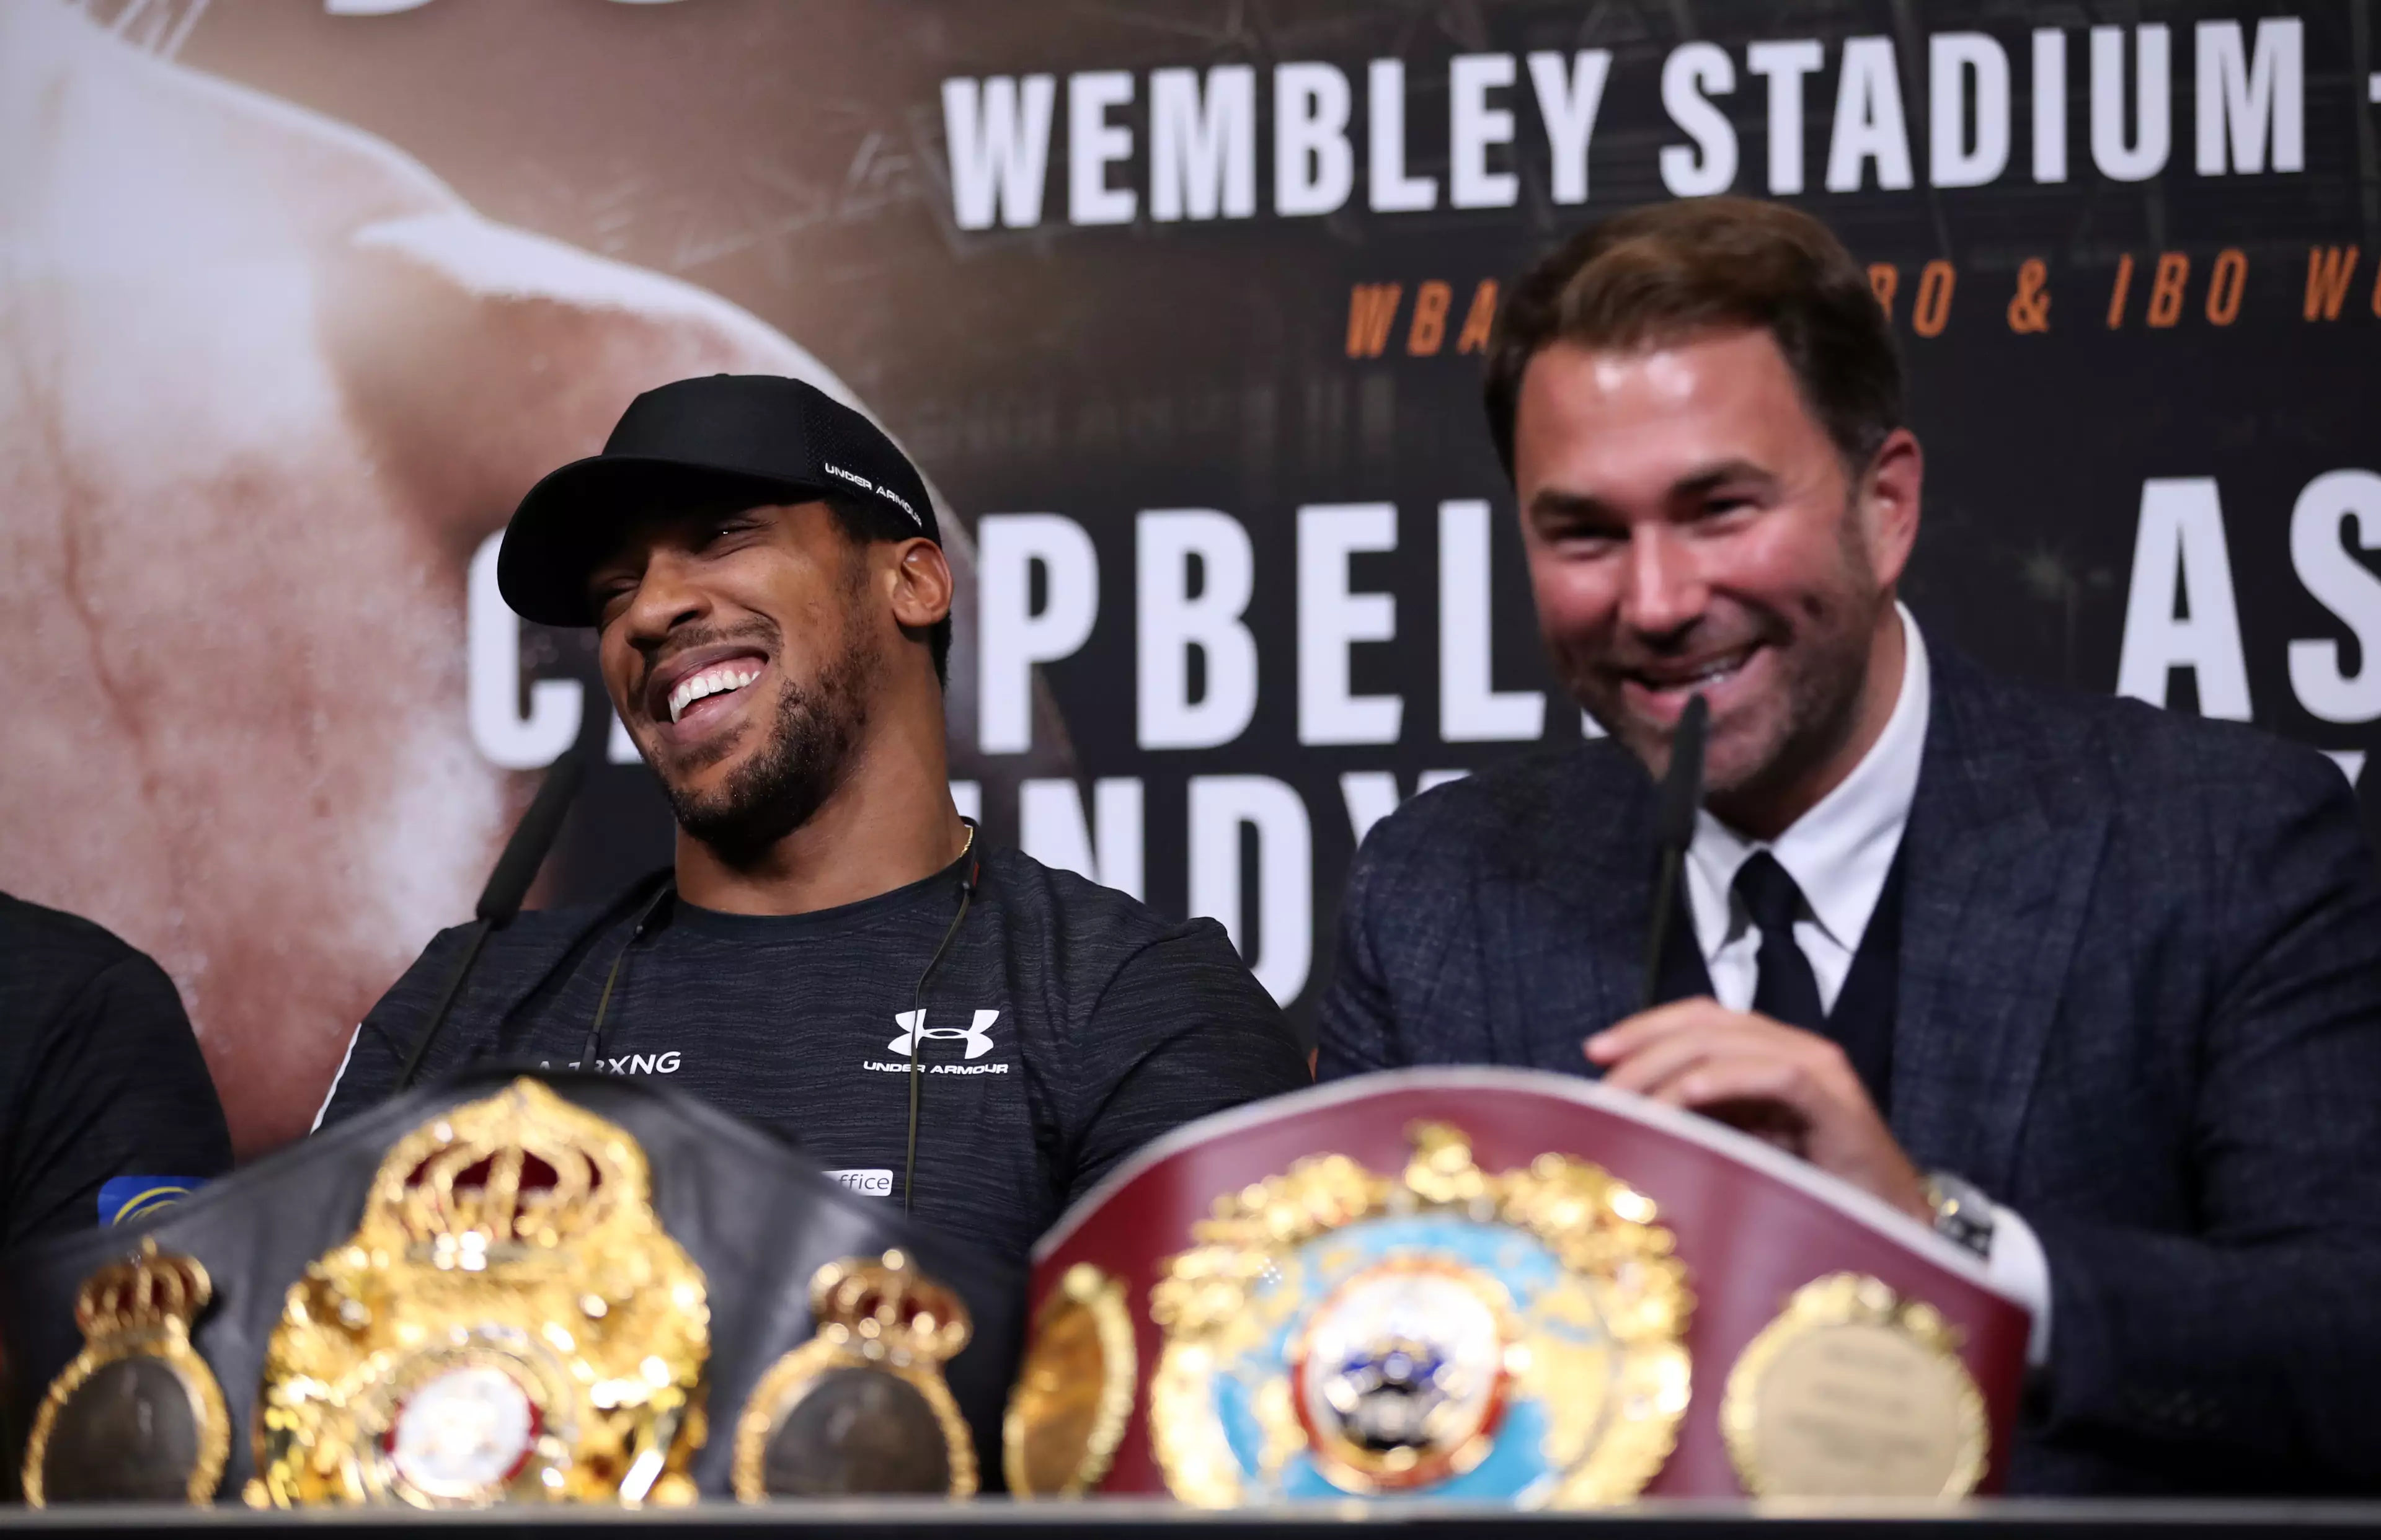 Joshua and Hearn have been accused of dodging Wilder. Image: PA Images